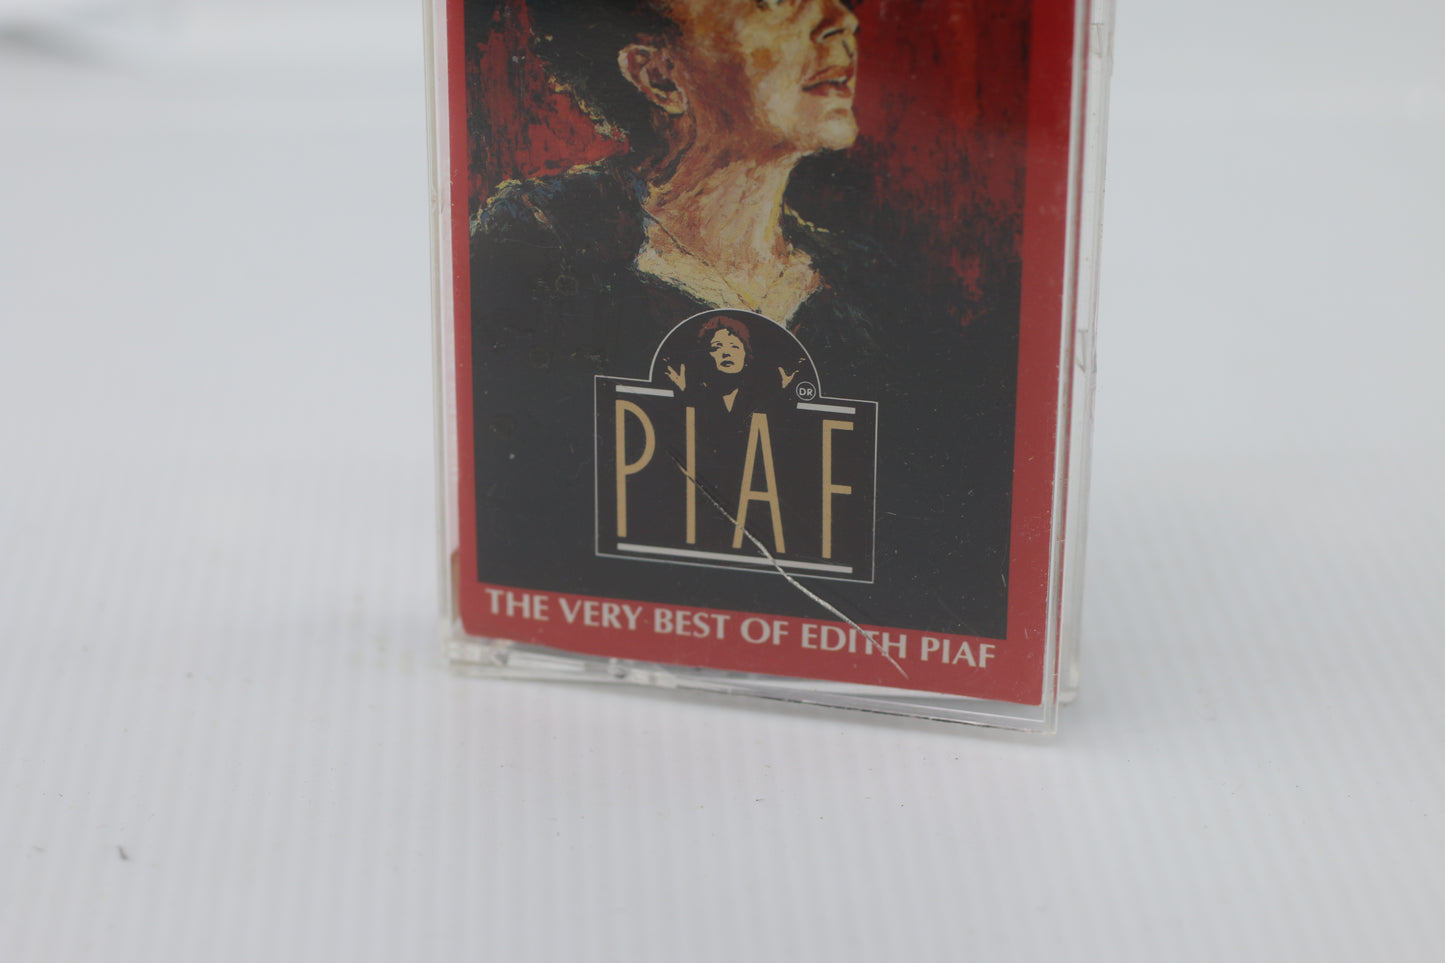 VTG Edith Piaf Voice of the Sparrow Very Best of Edith Piaf Cassette Tape, Capitol